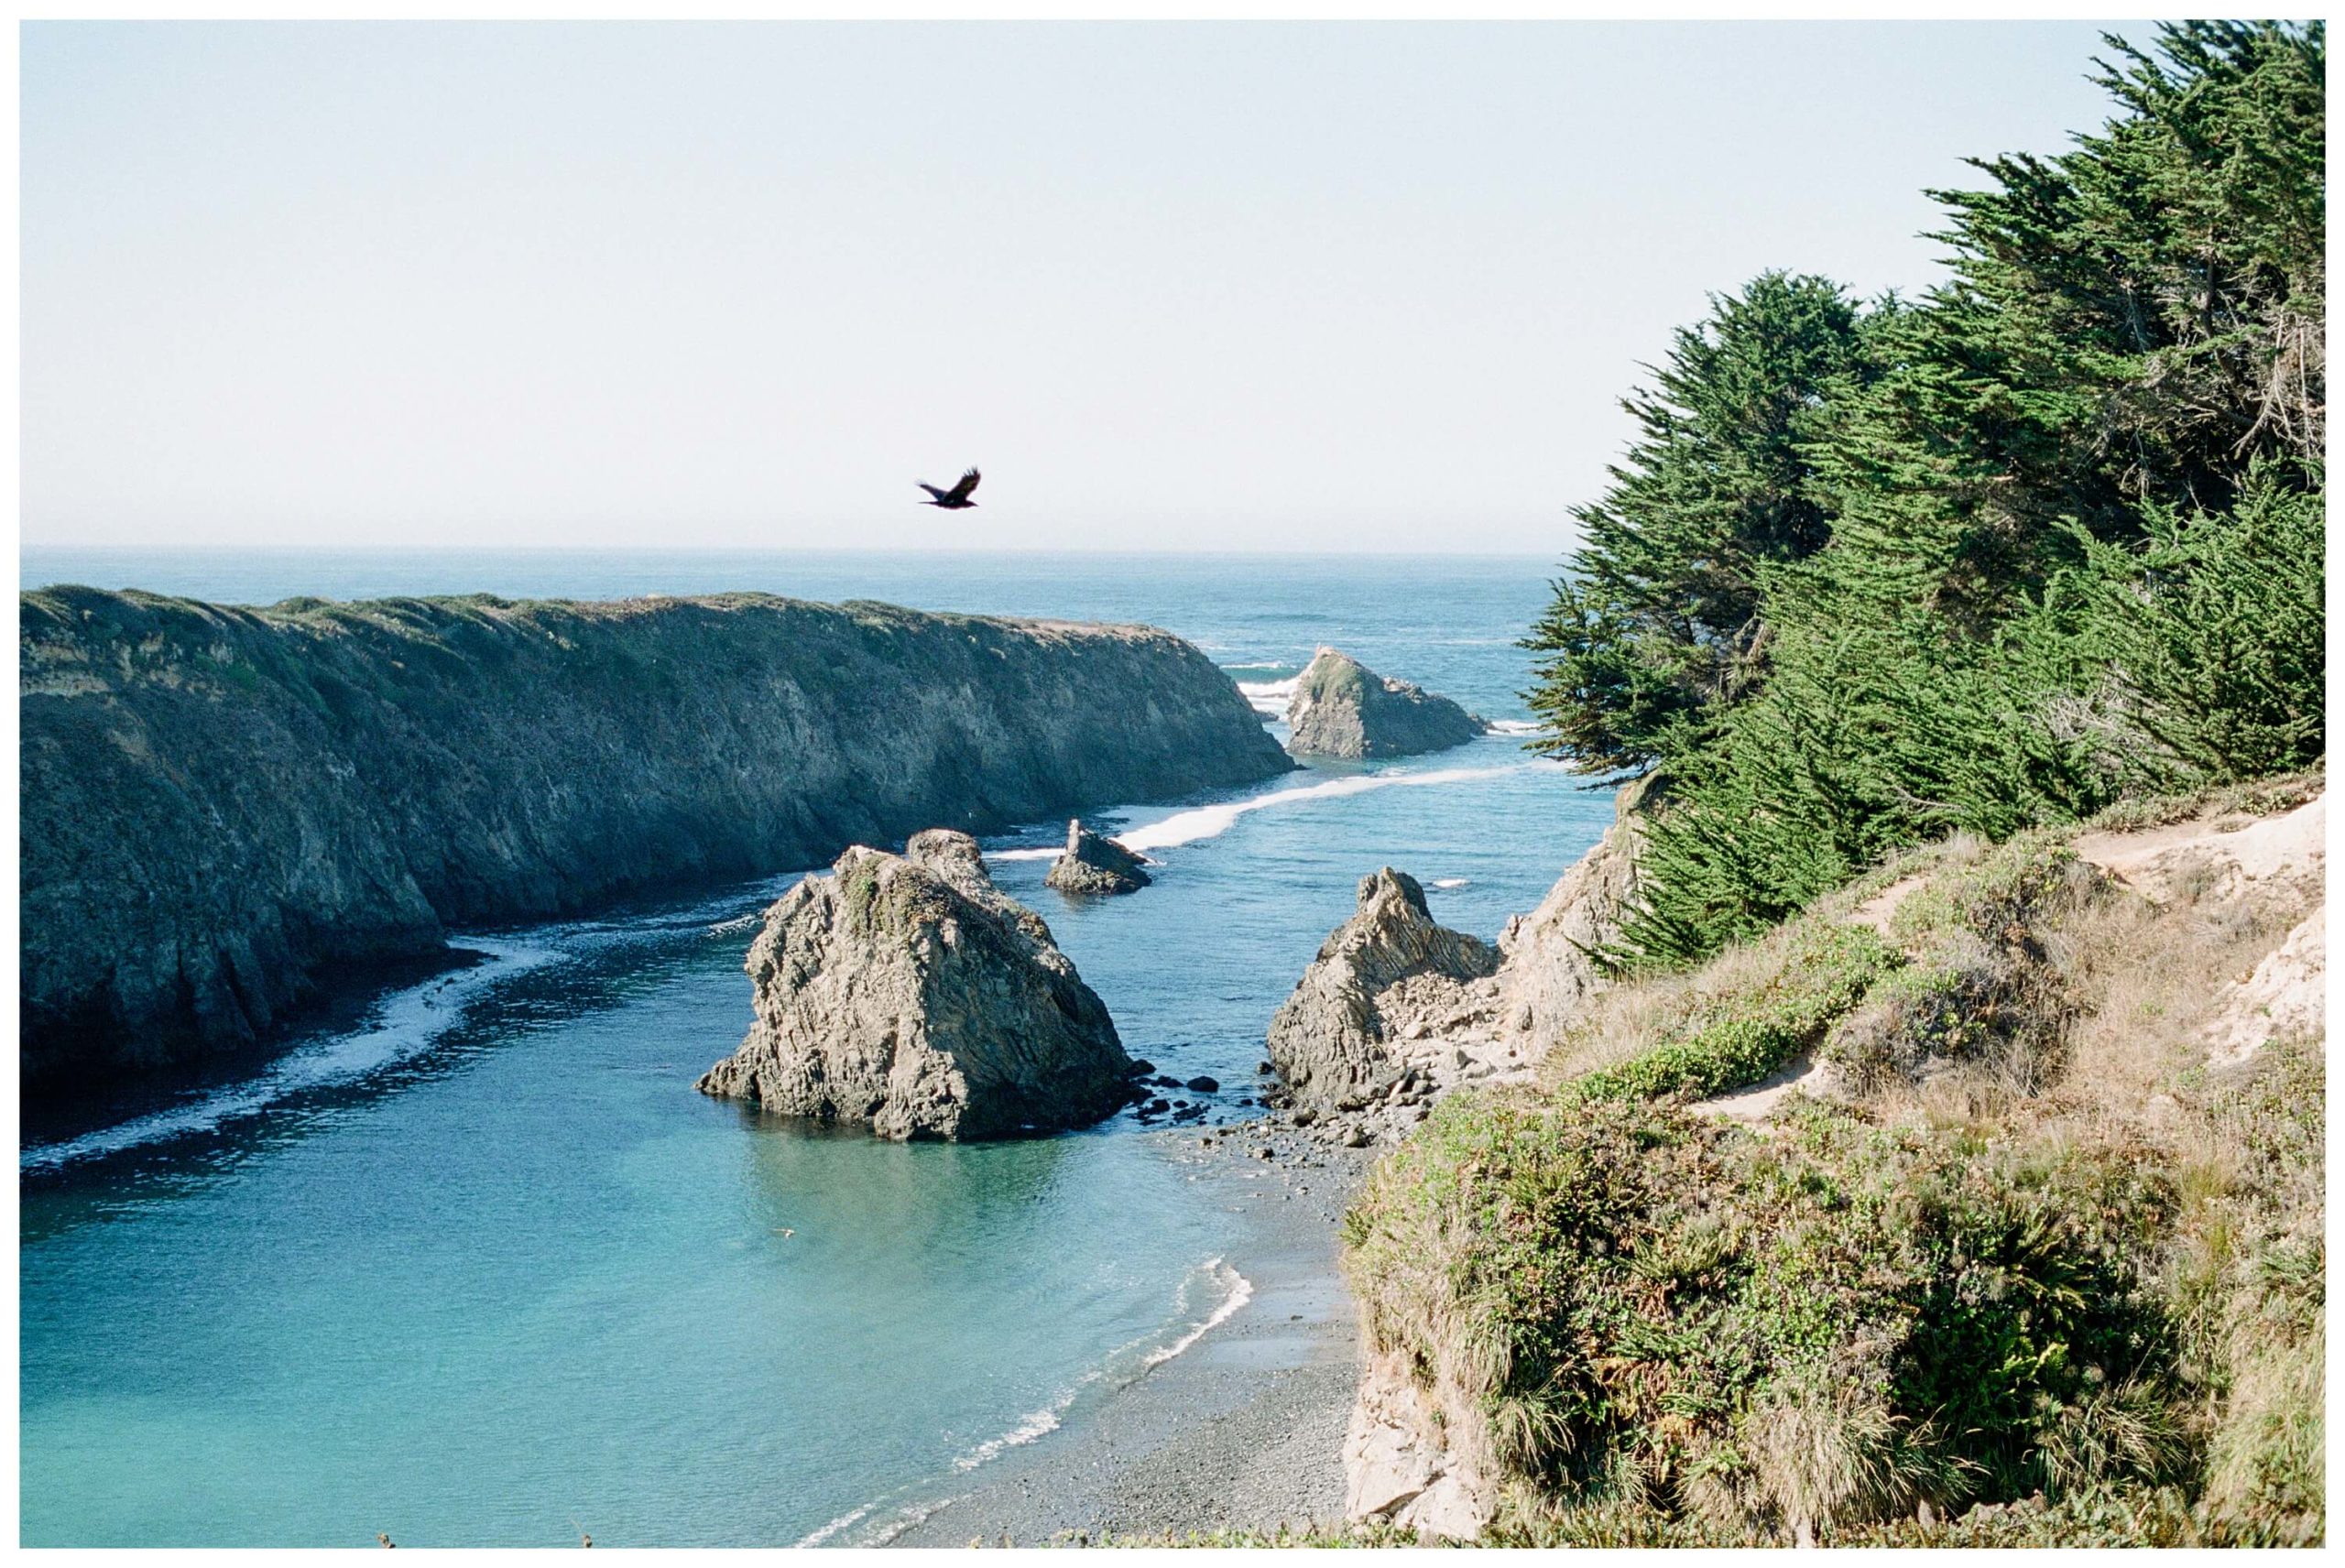 A lone black bird flies through the sky across a small inlet in the coast in Mendocino. The water is a bright turquoise in this northern California coastal town.